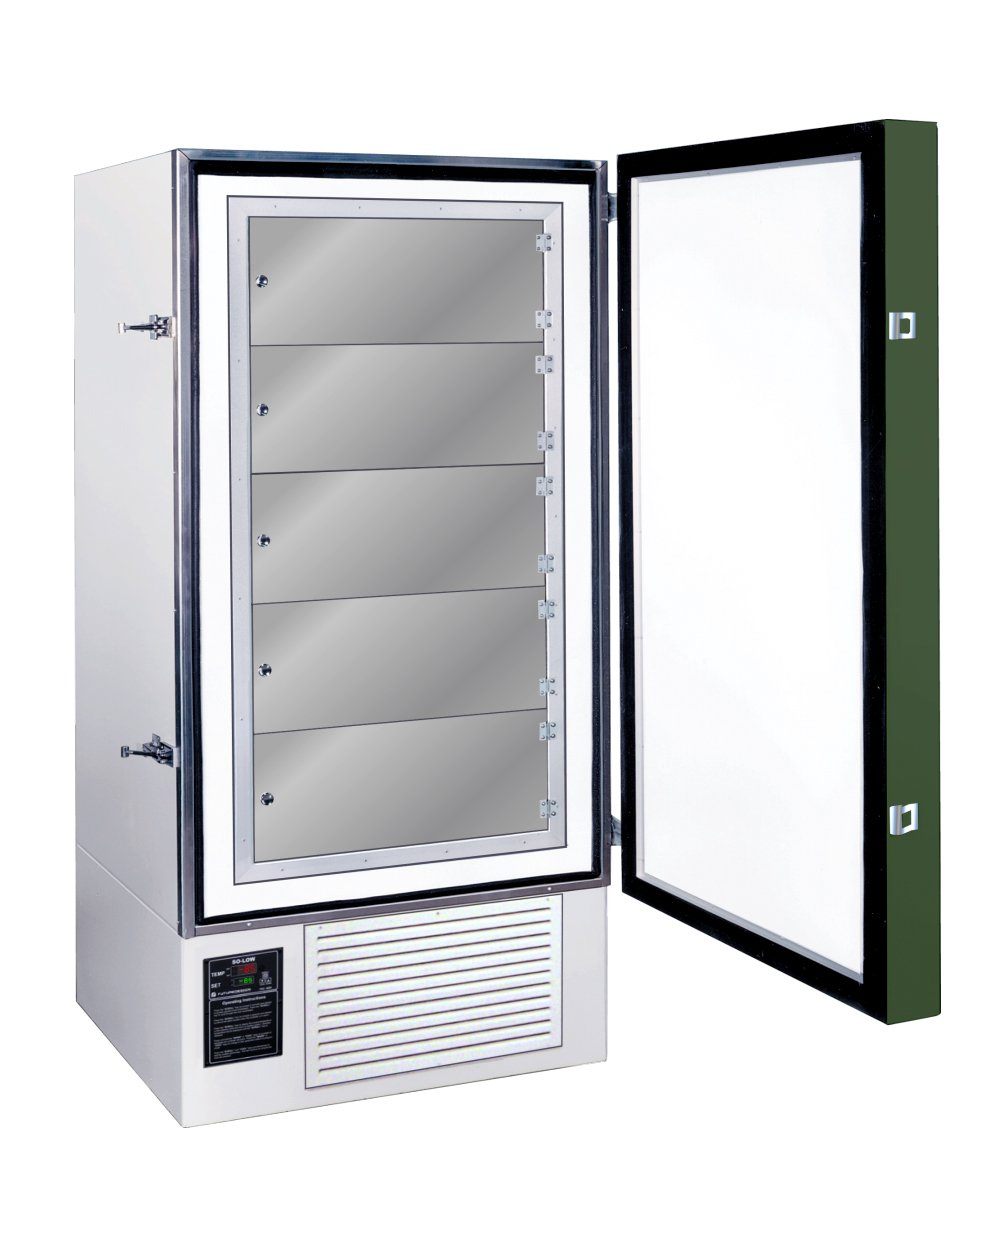 So-Low, So-Low -85°C Ultra-Low Upright Freezer - 22 Cubic Ft.